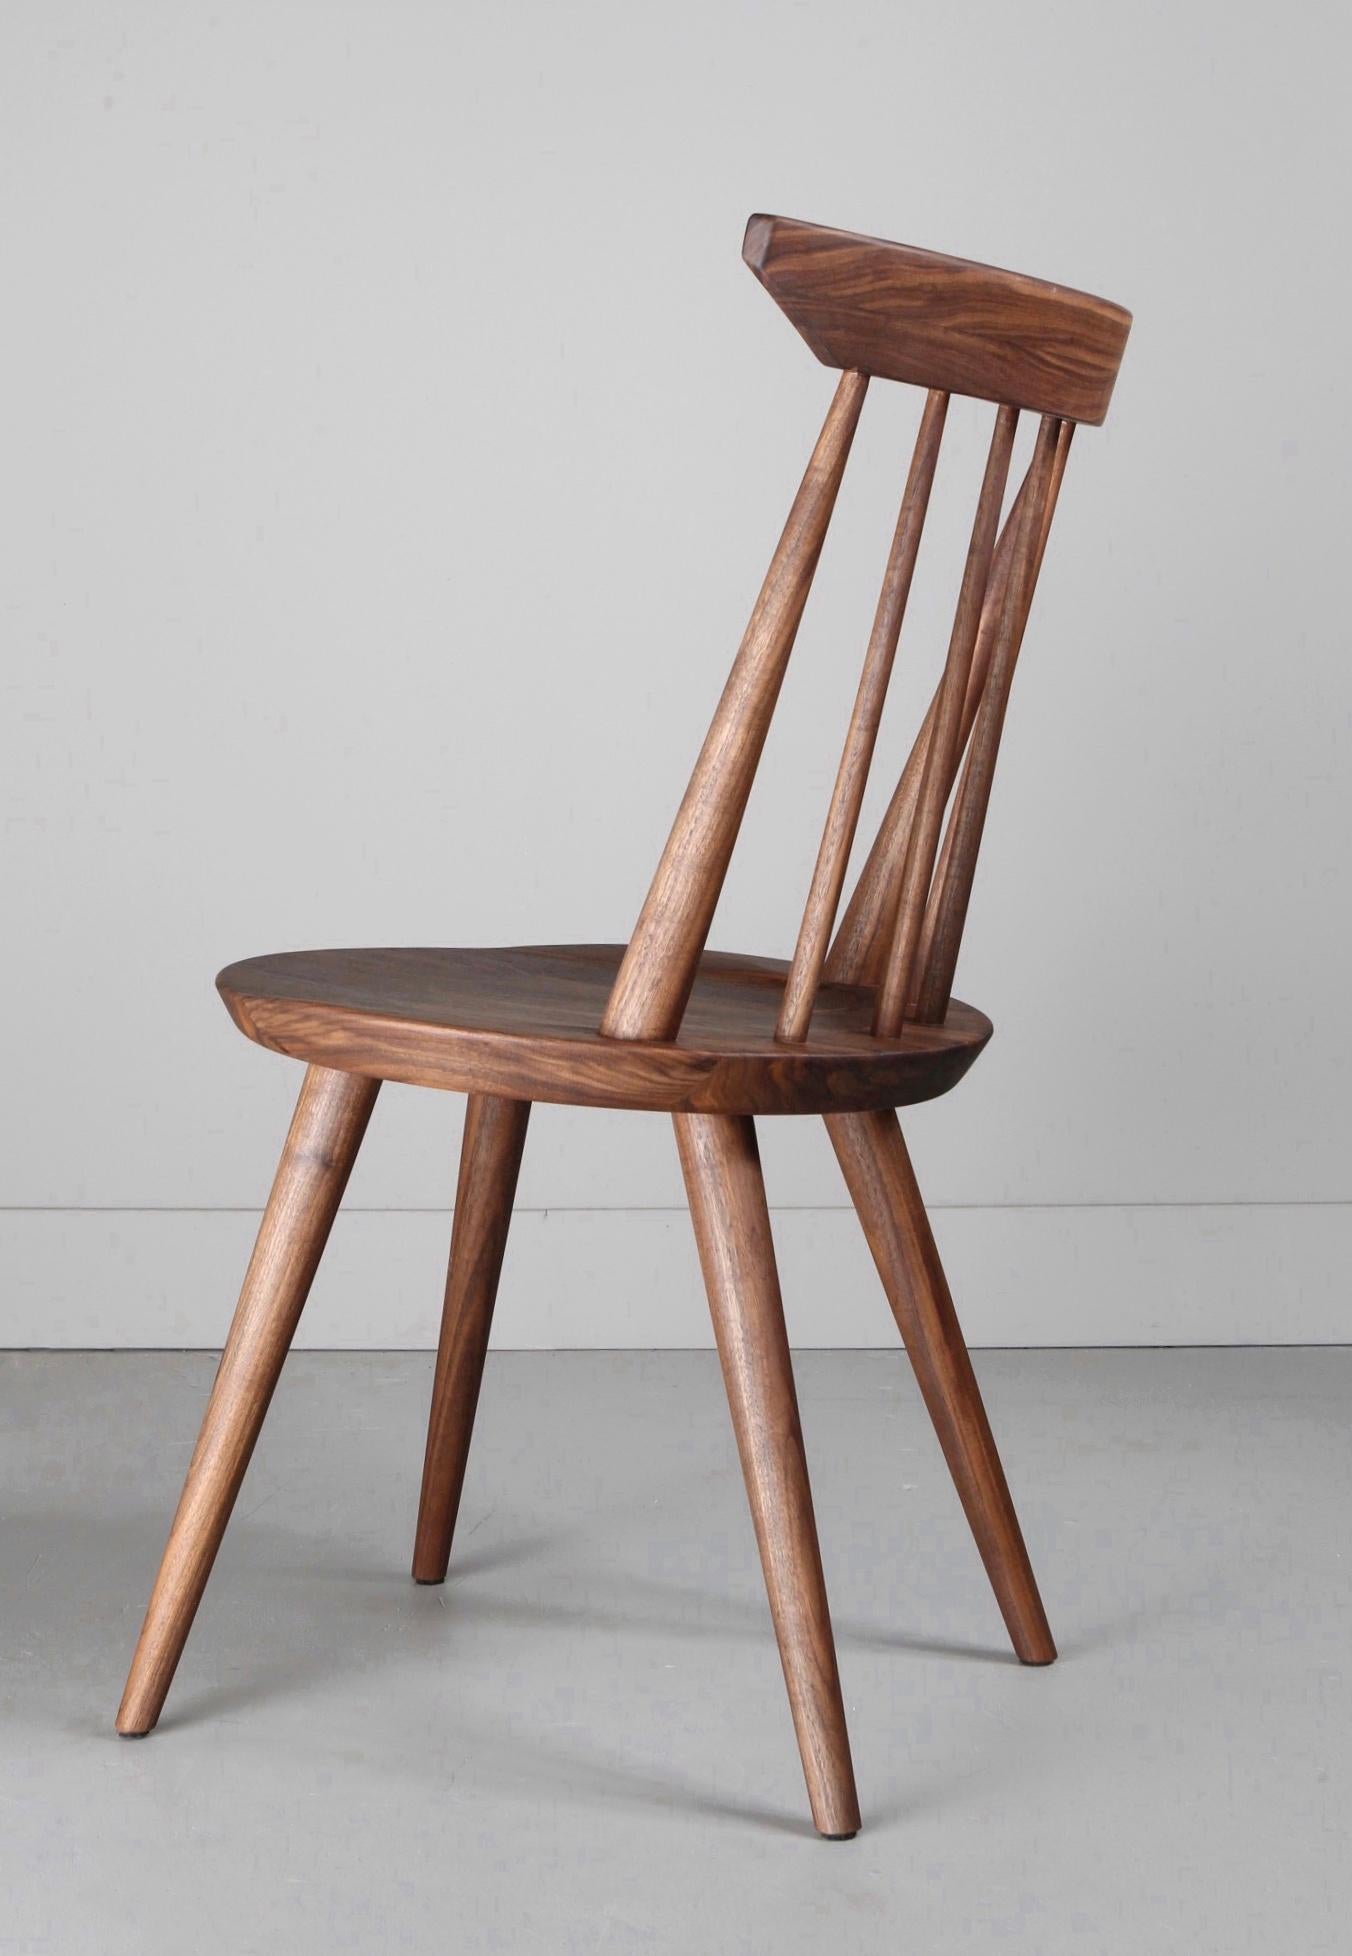 The Vände chair is a contemporary take on the classic Windsor chair. Hand-turned spindles feature wedged, mortice and tenon joinery for strength and aesthetic appeal.

The round seat has been sculpted for comfort. The back rest is both supportive